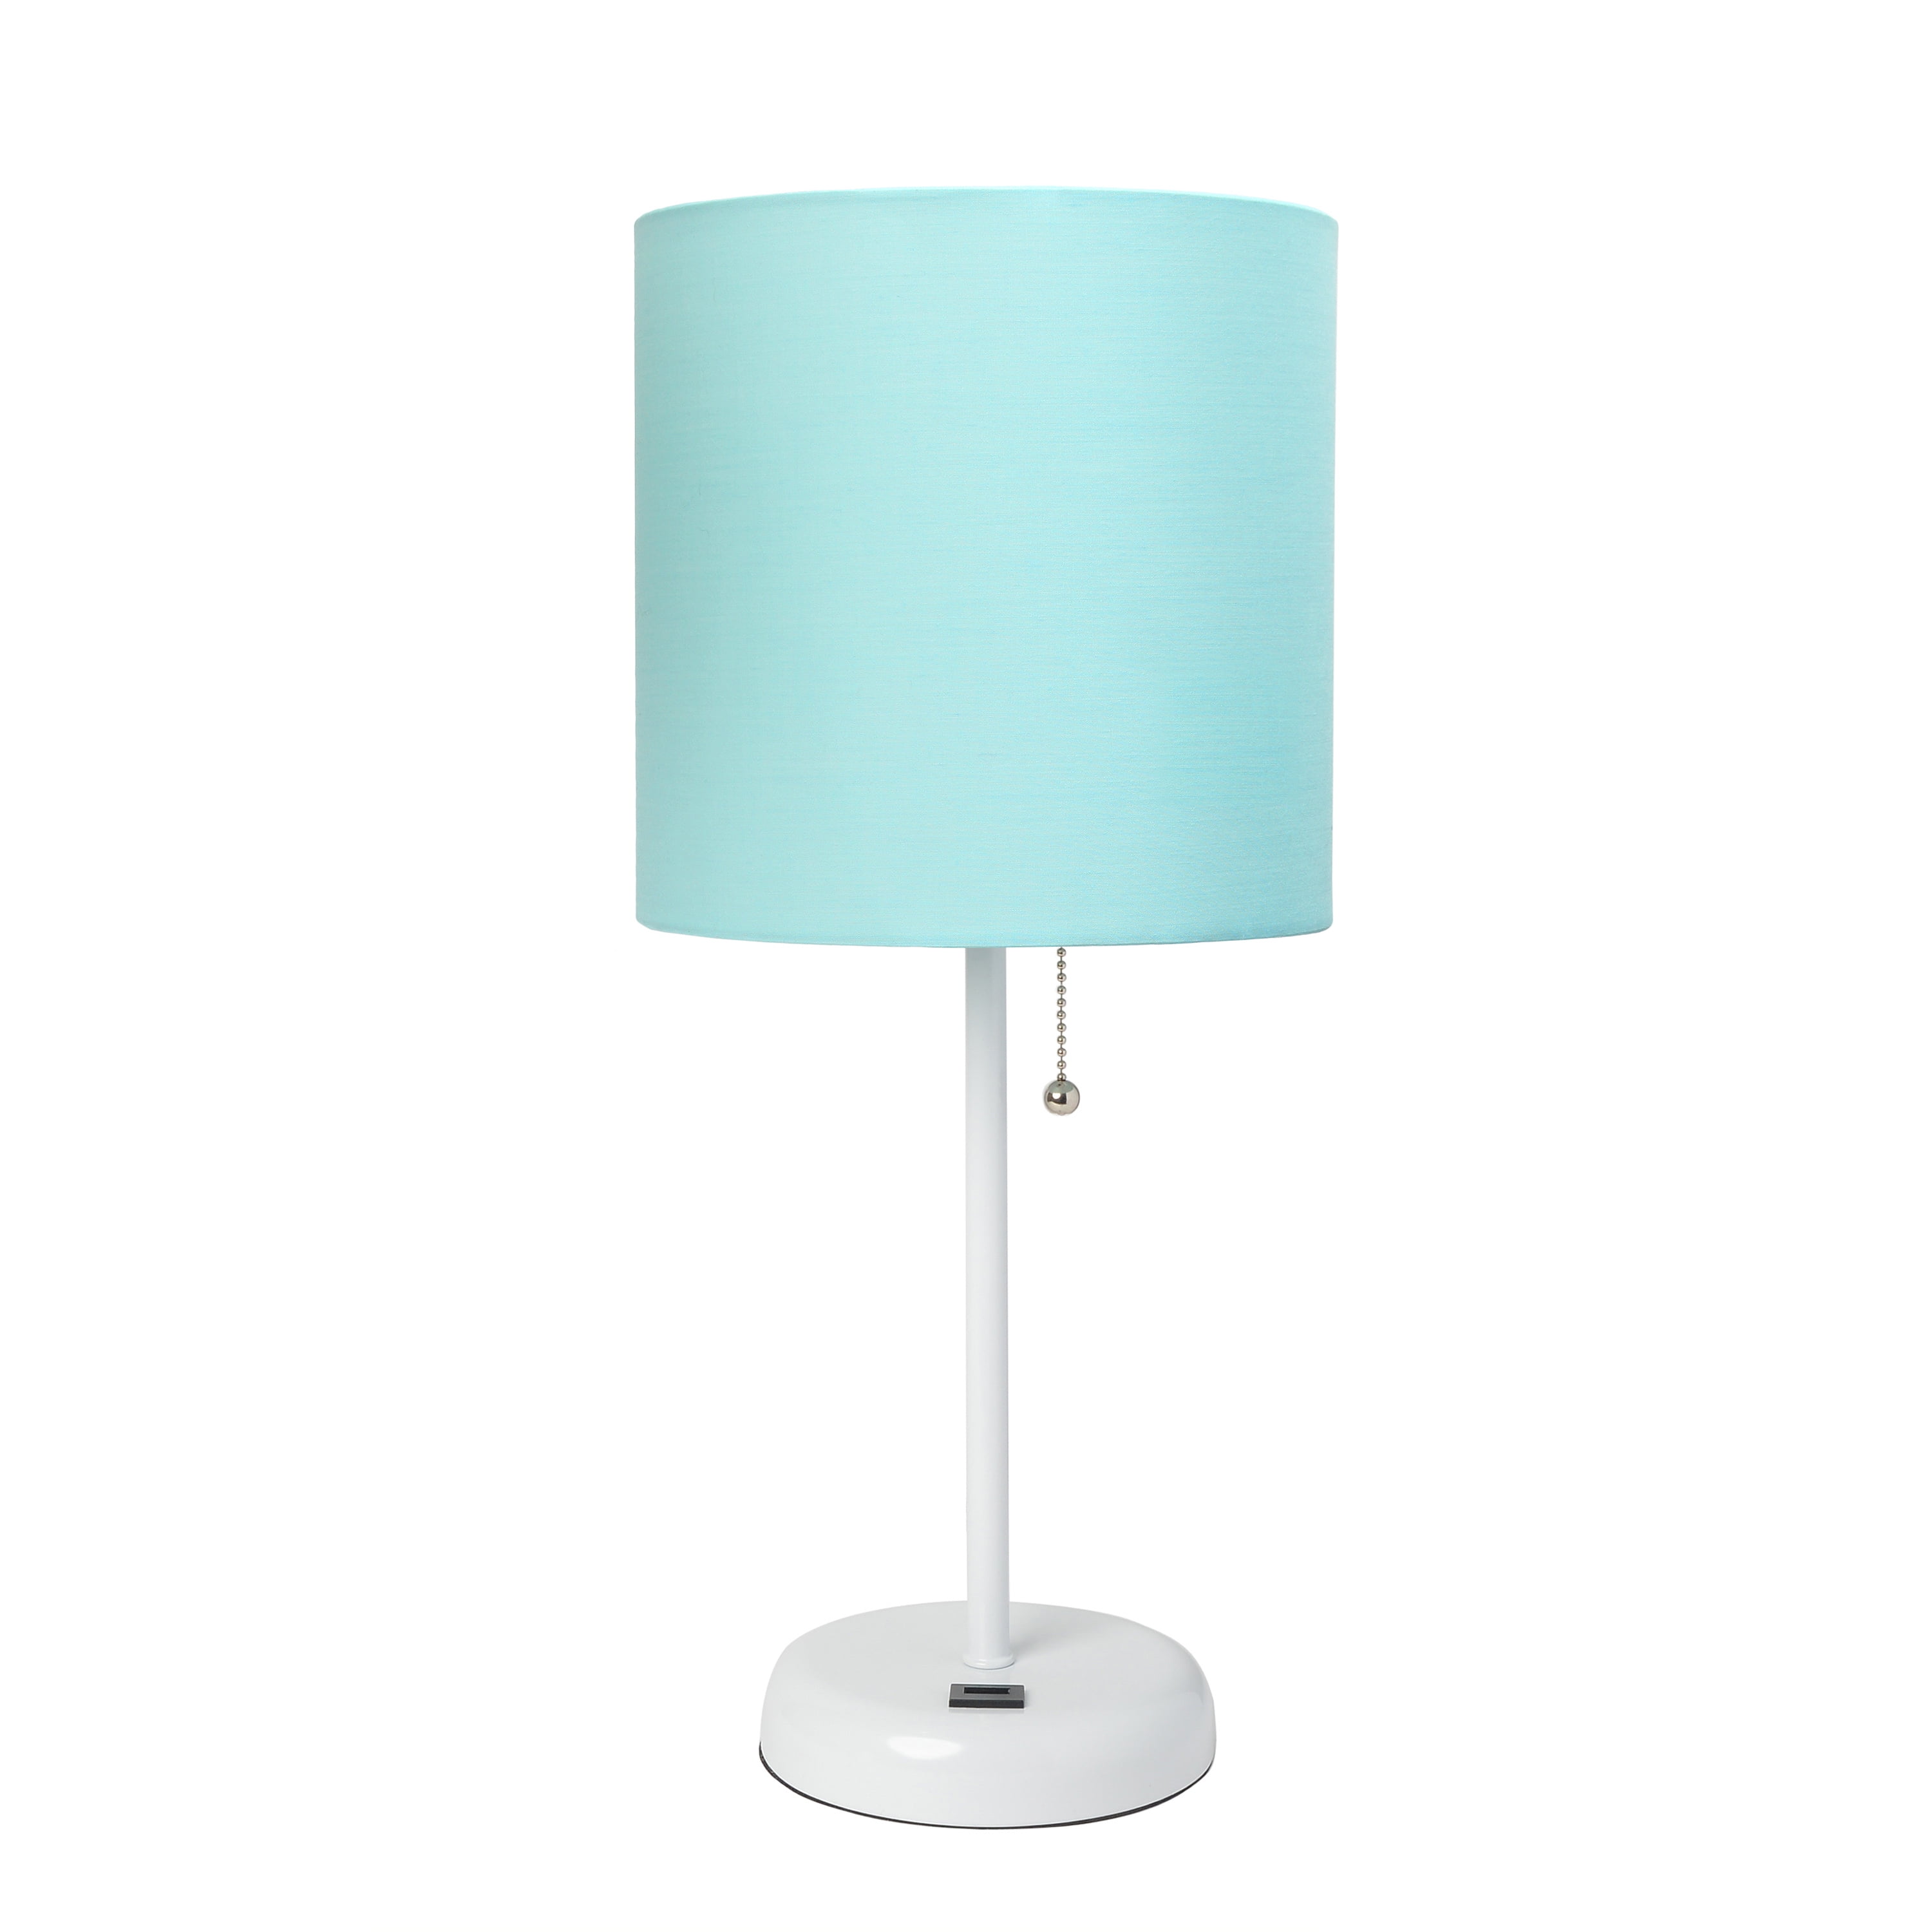 Lt2044-aow White Stick Table Lamp With Usb Charging Port & Fabric Shade, Aqua